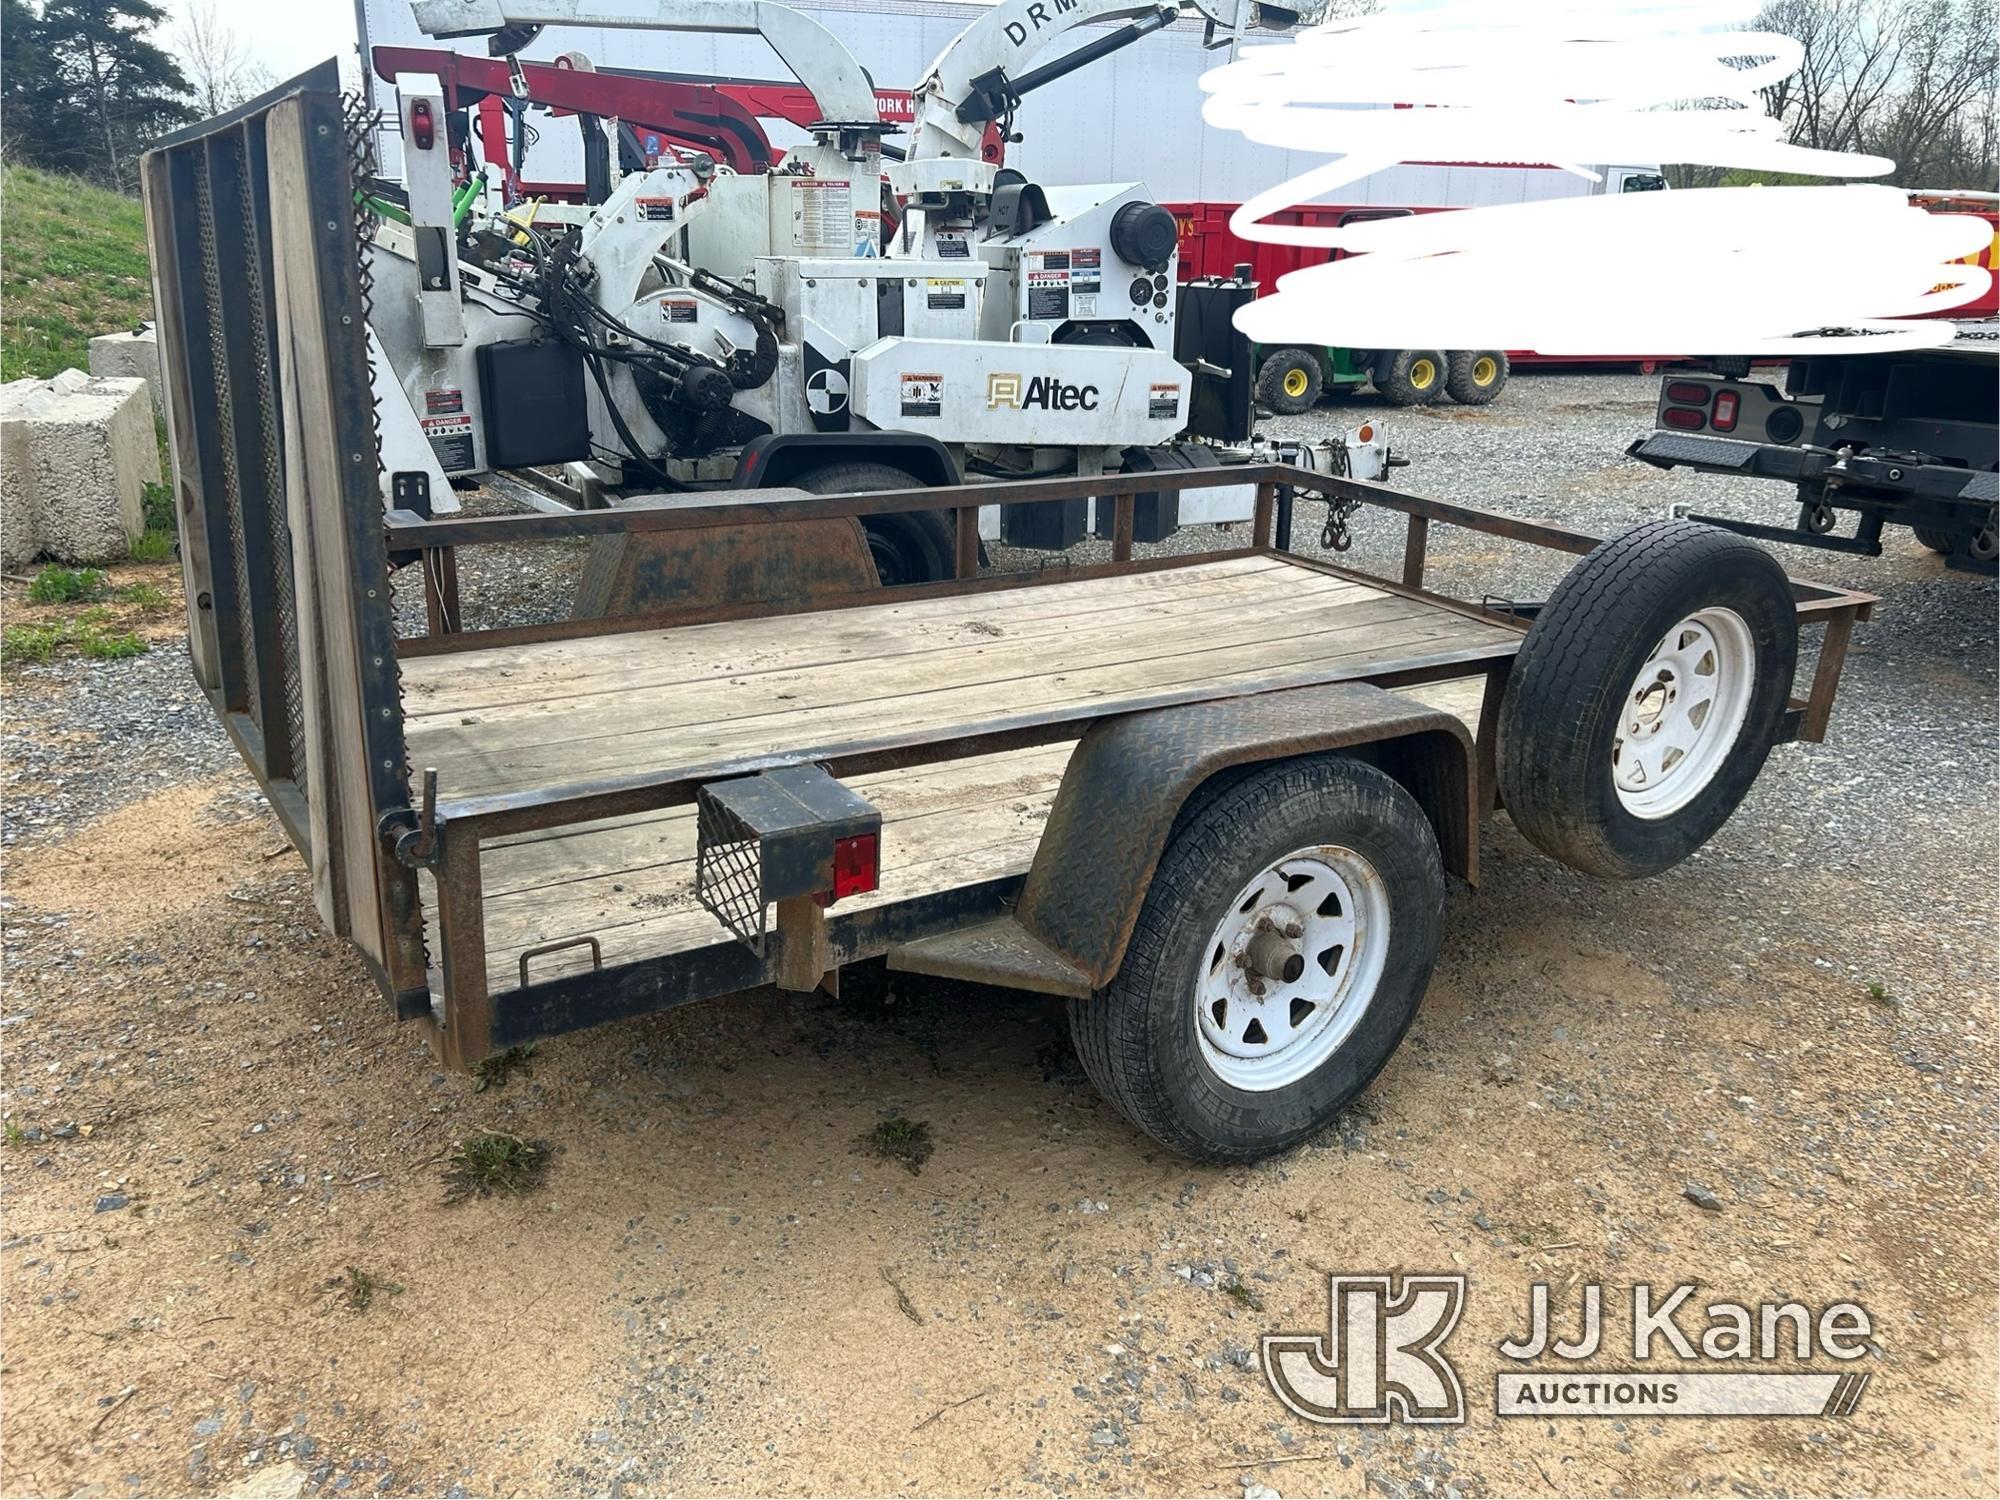 (Hagerstown, MD) 2013 Lone Wolf Trailer Condition Unknown, Rust Damage